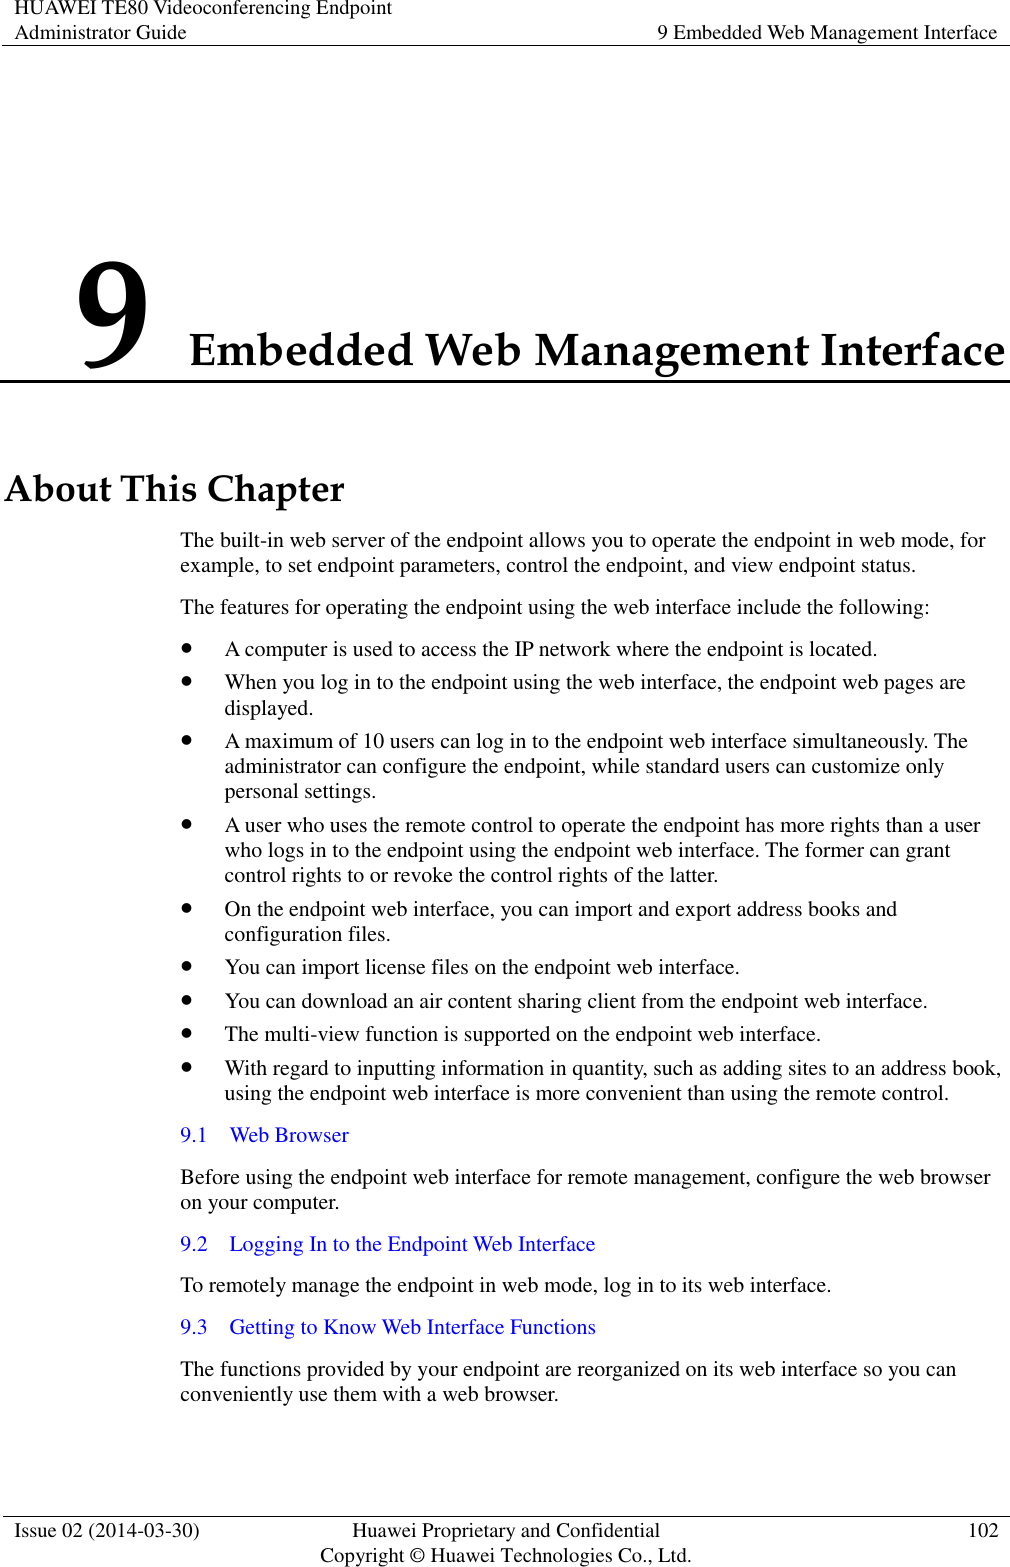 HUAWEI TE80 Videoconferencing Endpoint Administrator Guide 9 Embedded Web Management Interface  Issue 02 (2014-03-30) Huawei Proprietary and Confidential Copyright © Huawei Technologies Co., Ltd. 102  9 Embedded Web Management Interface About This Chapter The built-in web server of the endpoint allows you to operate the endpoint in web mode, for example, to set endpoint parameters, control the endpoint, and view endpoint status. The features for operating the endpoint using the web interface include the following:  A computer is used to access the IP network where the endpoint is located.  When you log in to the endpoint using the web interface, the endpoint web pages are displayed.  A maximum of 10 users can log in to the endpoint web interface simultaneously. The administrator can configure the endpoint, while standard users can customize only personal settings.  A user who uses the remote control to operate the endpoint has more rights than a user who logs in to the endpoint using the endpoint web interface. The former can grant control rights to or revoke the control rights of the latter.  On the endpoint web interface, you can import and export address books and configuration files.  You can import license files on the endpoint web interface.  You can download an air content sharing client from the endpoint web interface.    The multi-view function is supported on the endpoint web interface.  With regard to inputting information in quantity, such as adding sites to an address book, using the endpoint web interface is more convenient than using the remote control. 9.1    Web Browser Before using the endpoint web interface for remote management, configure the web browser on your computer. 9.2    Logging In to the Endpoint Web Interface To remotely manage the endpoint in web mode, log in to its web interface. 9.3    Getting to Know Web Interface Functions The functions provided by your endpoint are reorganized on its web interface so you can conveniently use them with a web browser. 